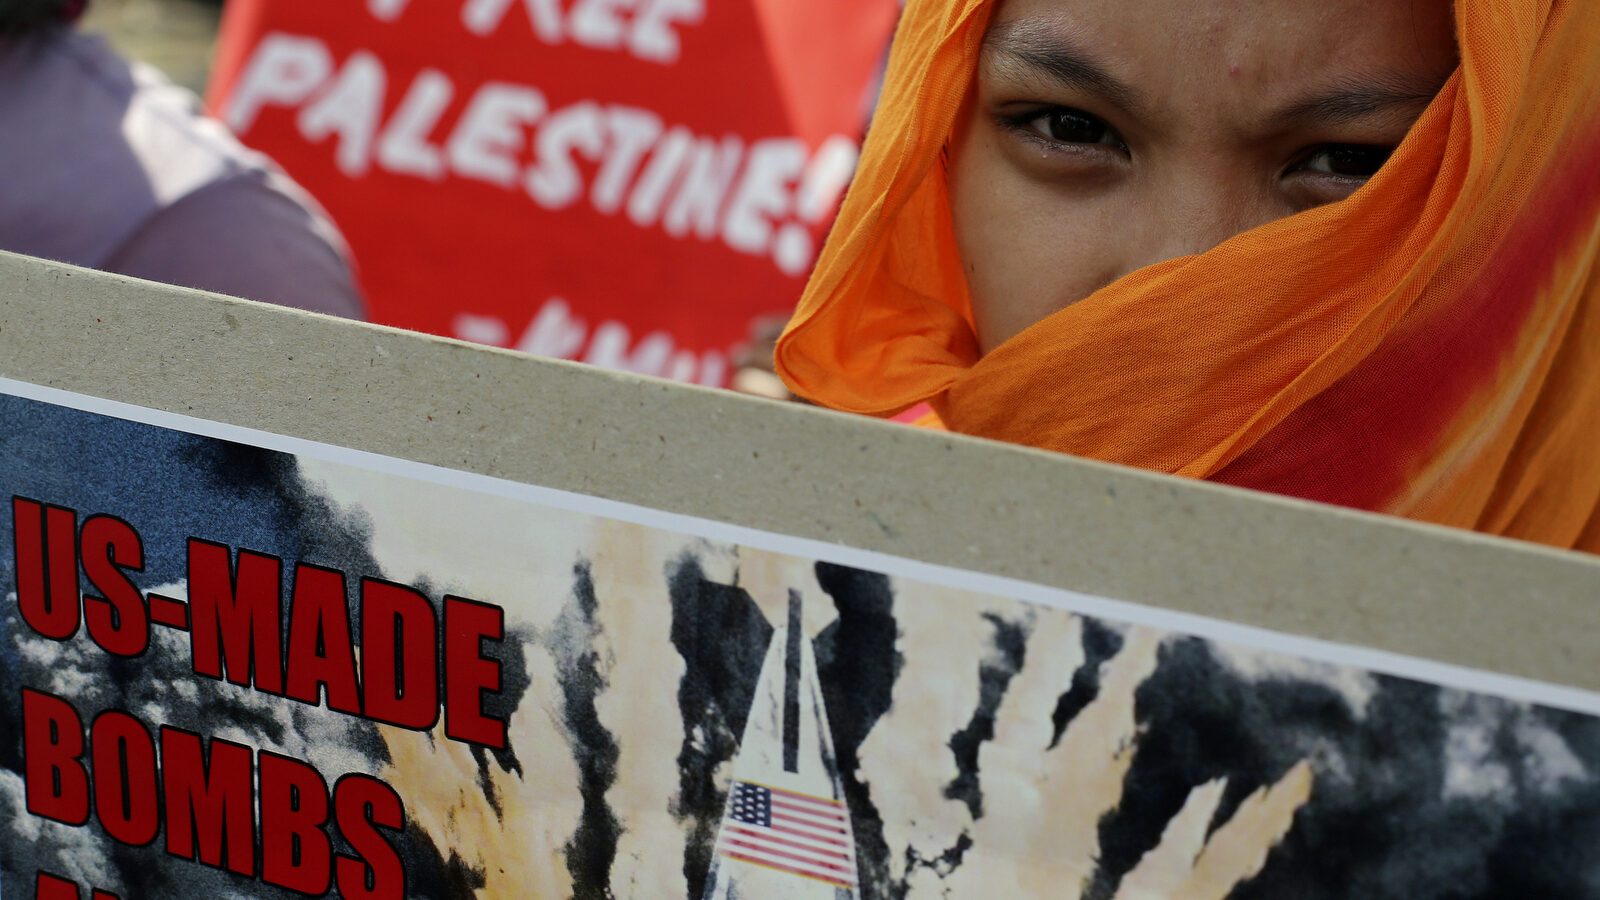 A Filipino activist holds a slogan during a rally in observance of the International Day of Solidarity with the Palestinian People in front of the U.S. Embassy in Manila, Philippines Sunday, Nov. 29, 2015. (AP Photo/Aaron Favila)